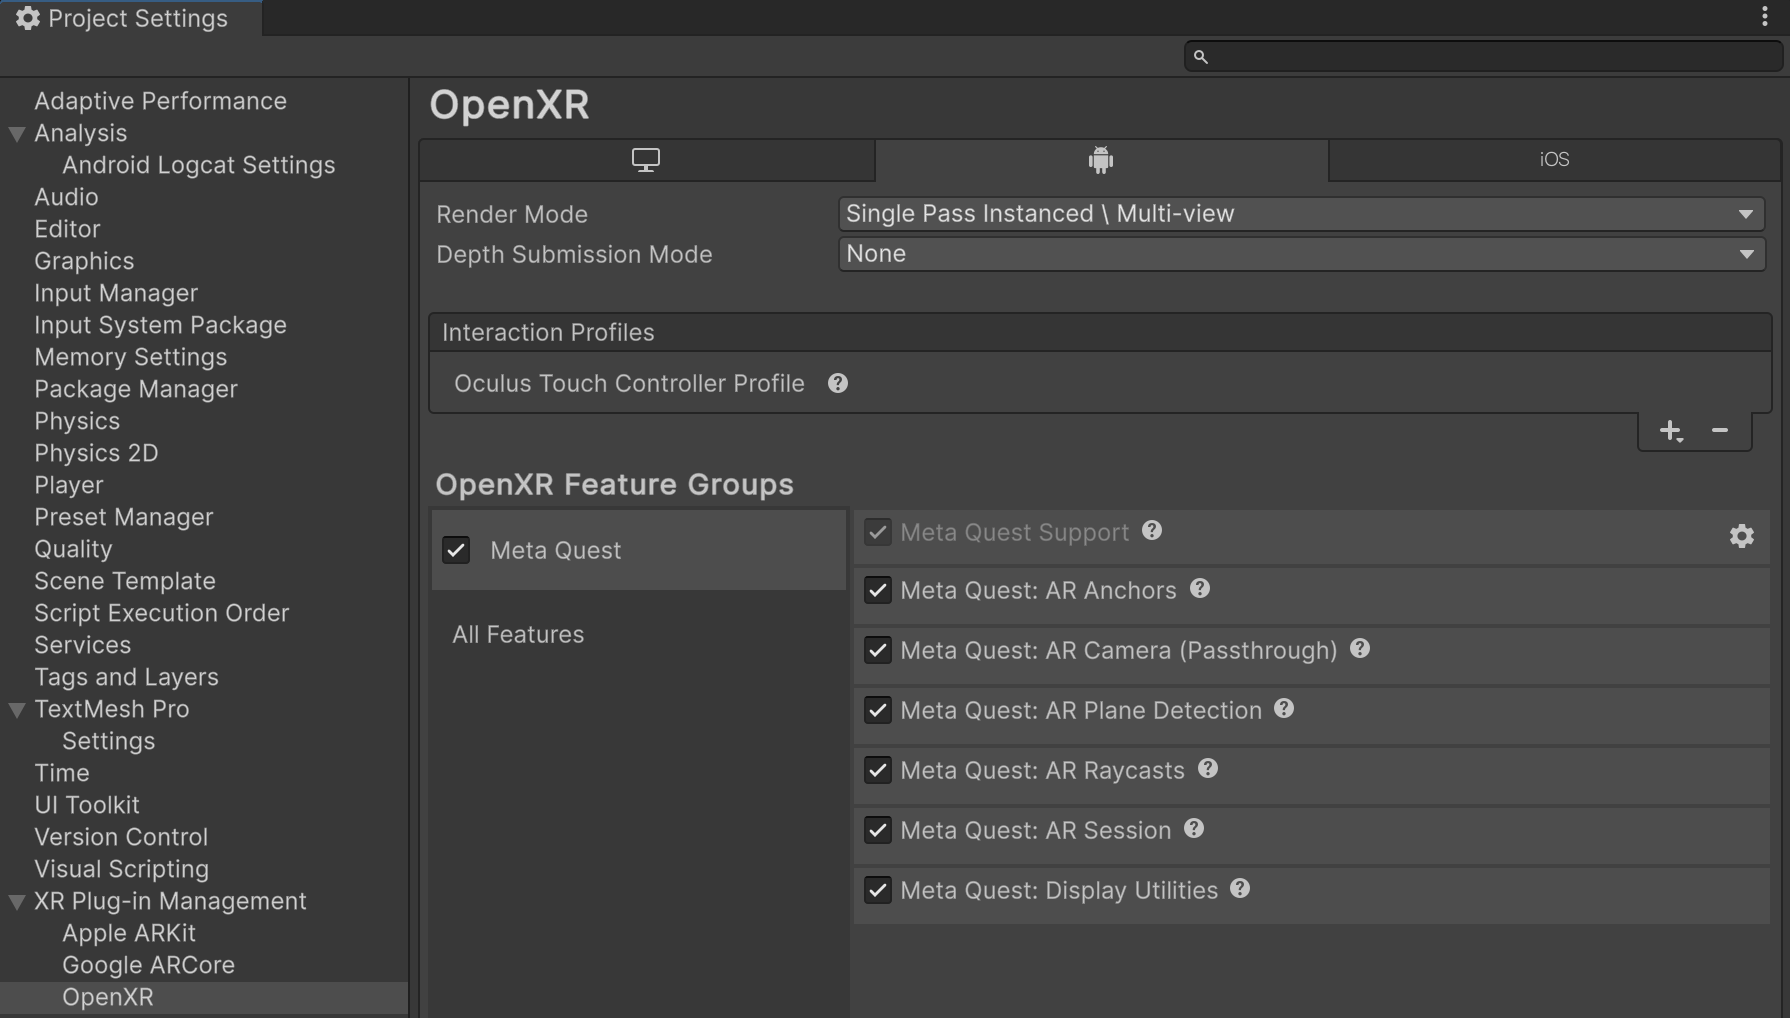 Unity Editor Project Settings menu. Single Pass Instanced\Multi-view, Oculus Touch Controller Profile, and the Meta Quest feature group are selected in the Android tab in the OpenXR section of the XR Plug-in Management heading.